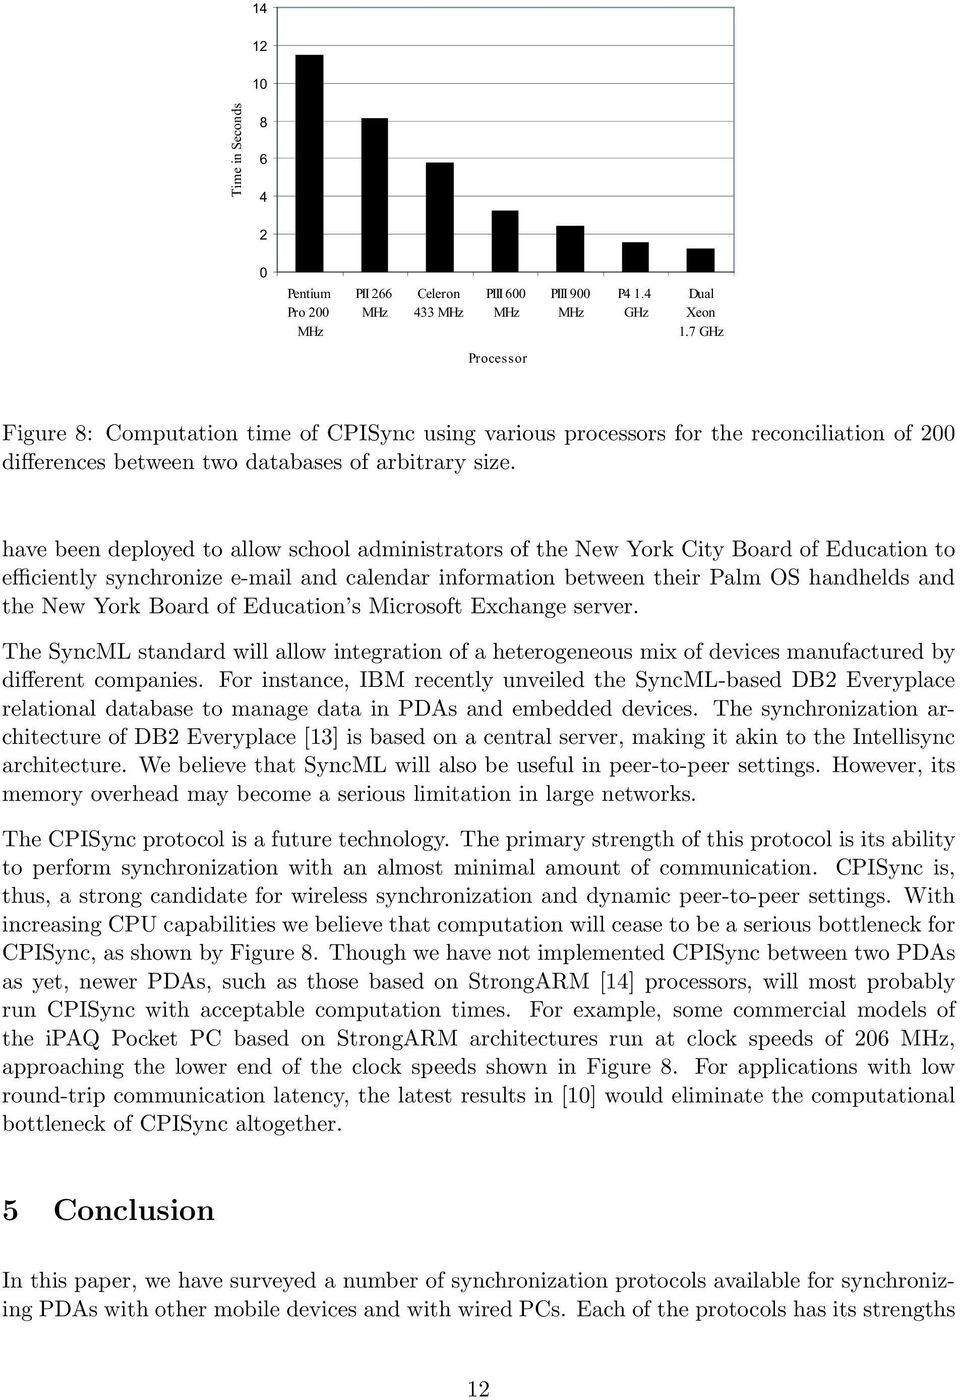 have been deployed to allow school administrators of the New York City Board of Education to efficiently synchronize e-mail and calendar information between their Palm OS handhelds and the New York